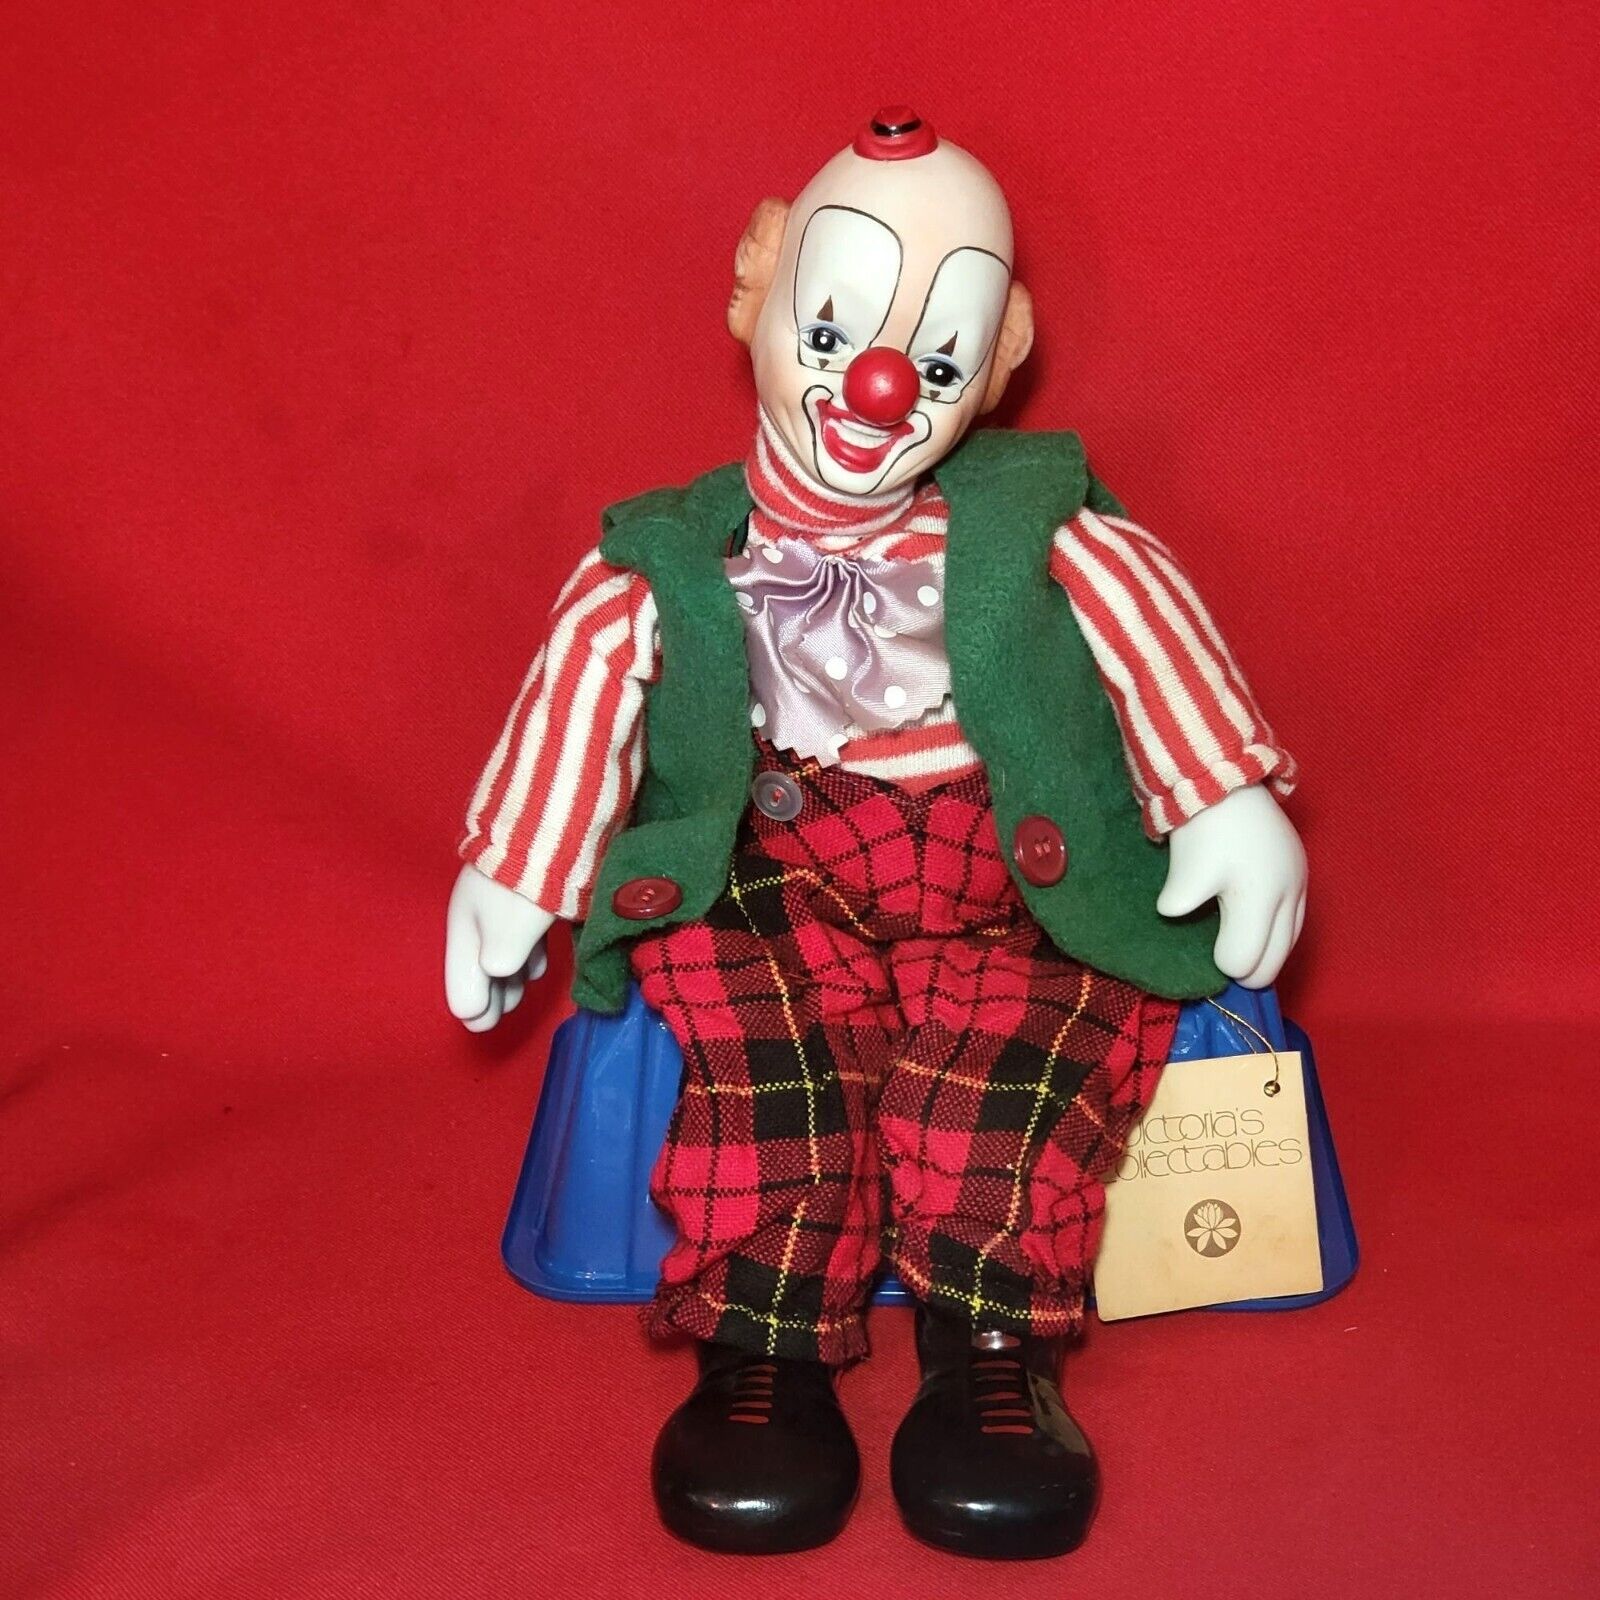 VTG Wind Up Musical Animated Head Moving Porcelain Clown Plays Send In The Clown